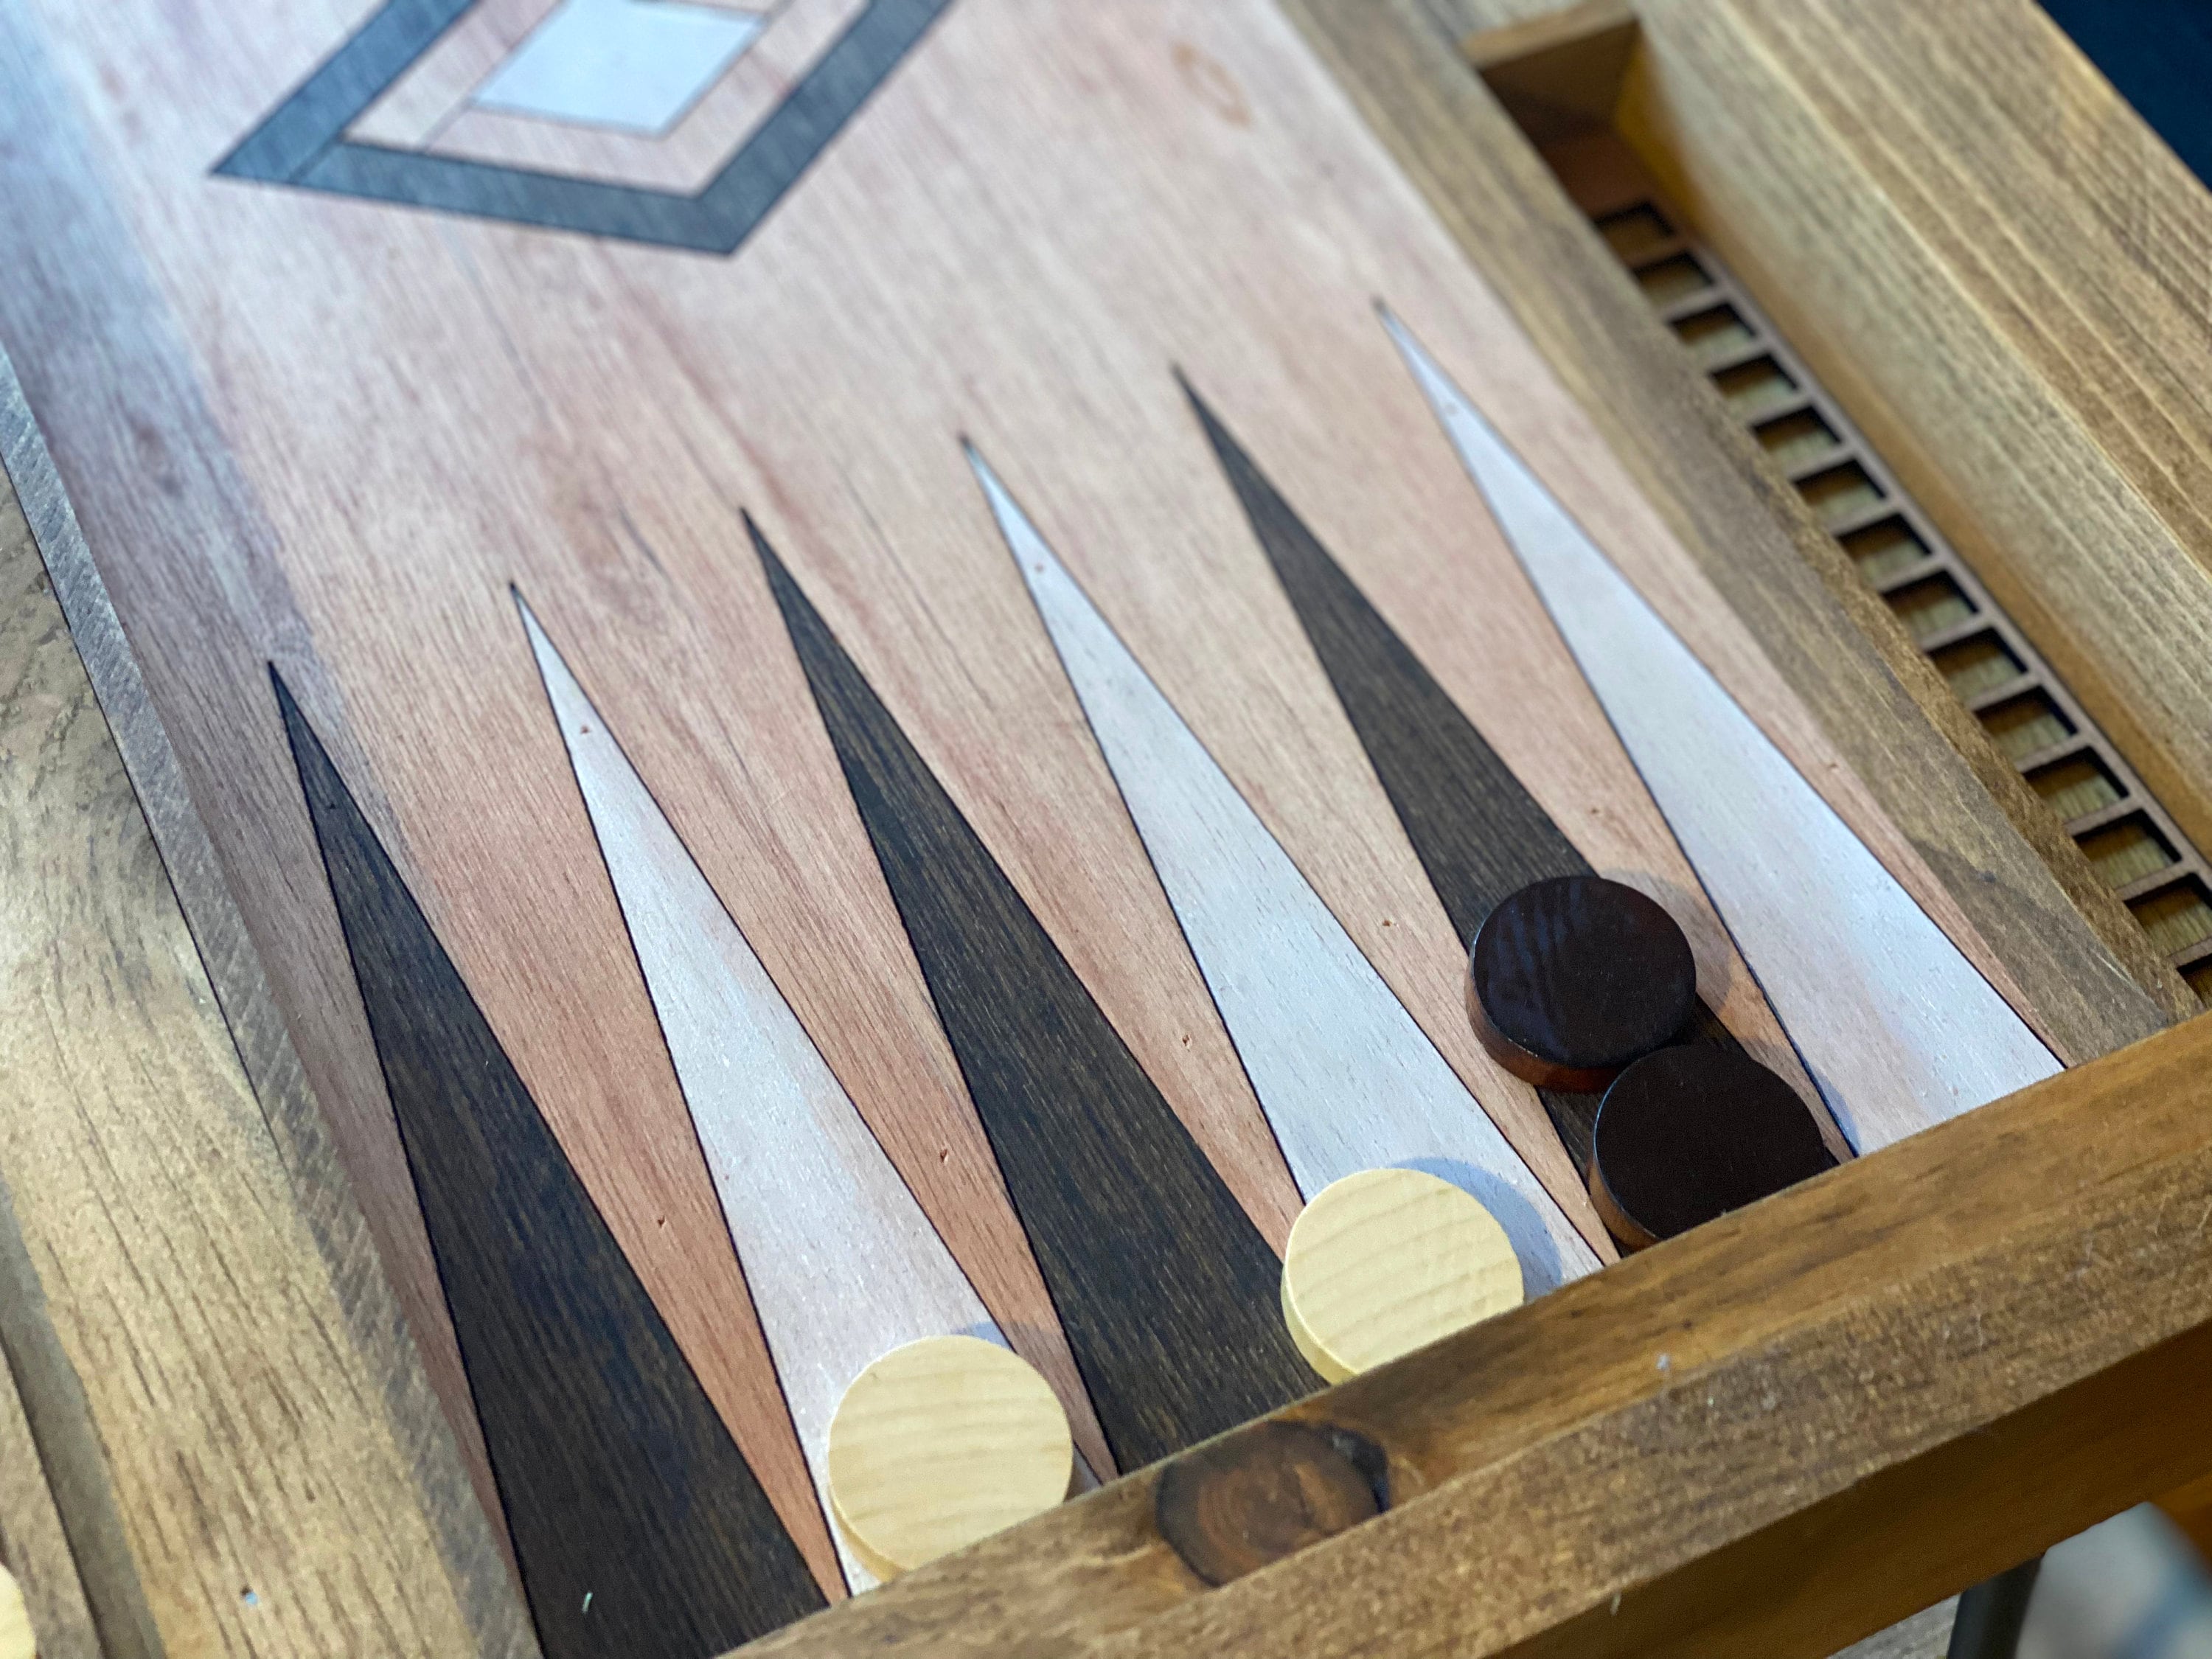 Rustic Backgammon Coffee Table with removable glass top - 100% Made in the USA